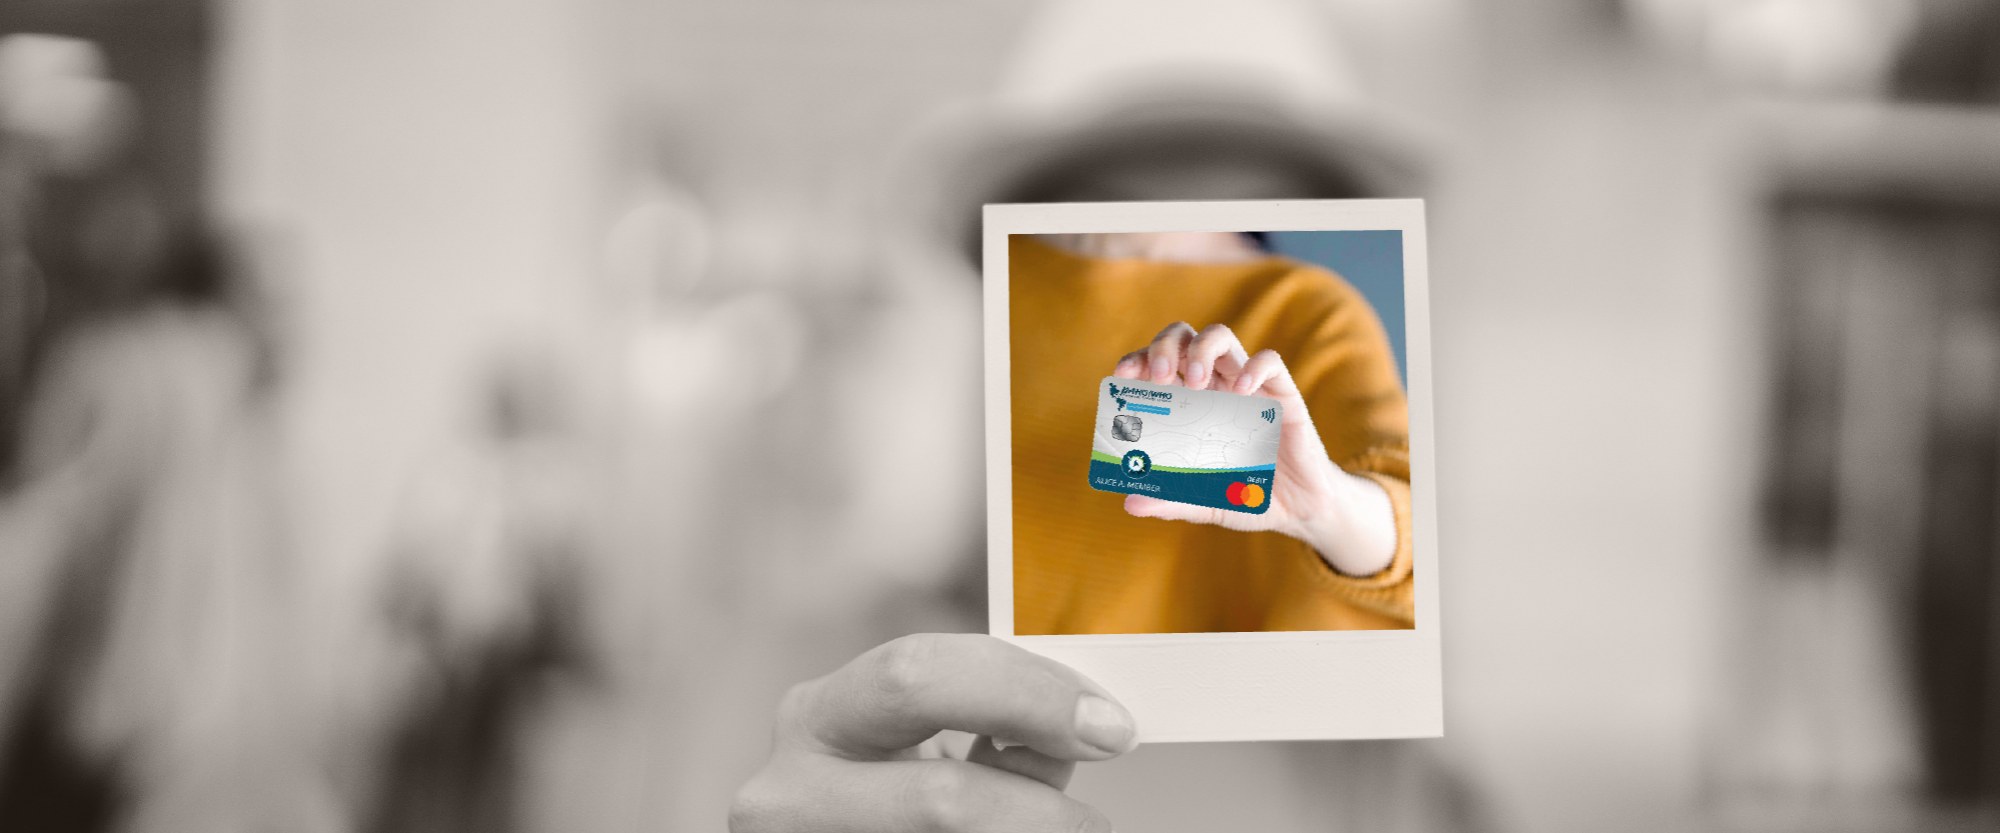 hand holding a polaroid with image of credit card